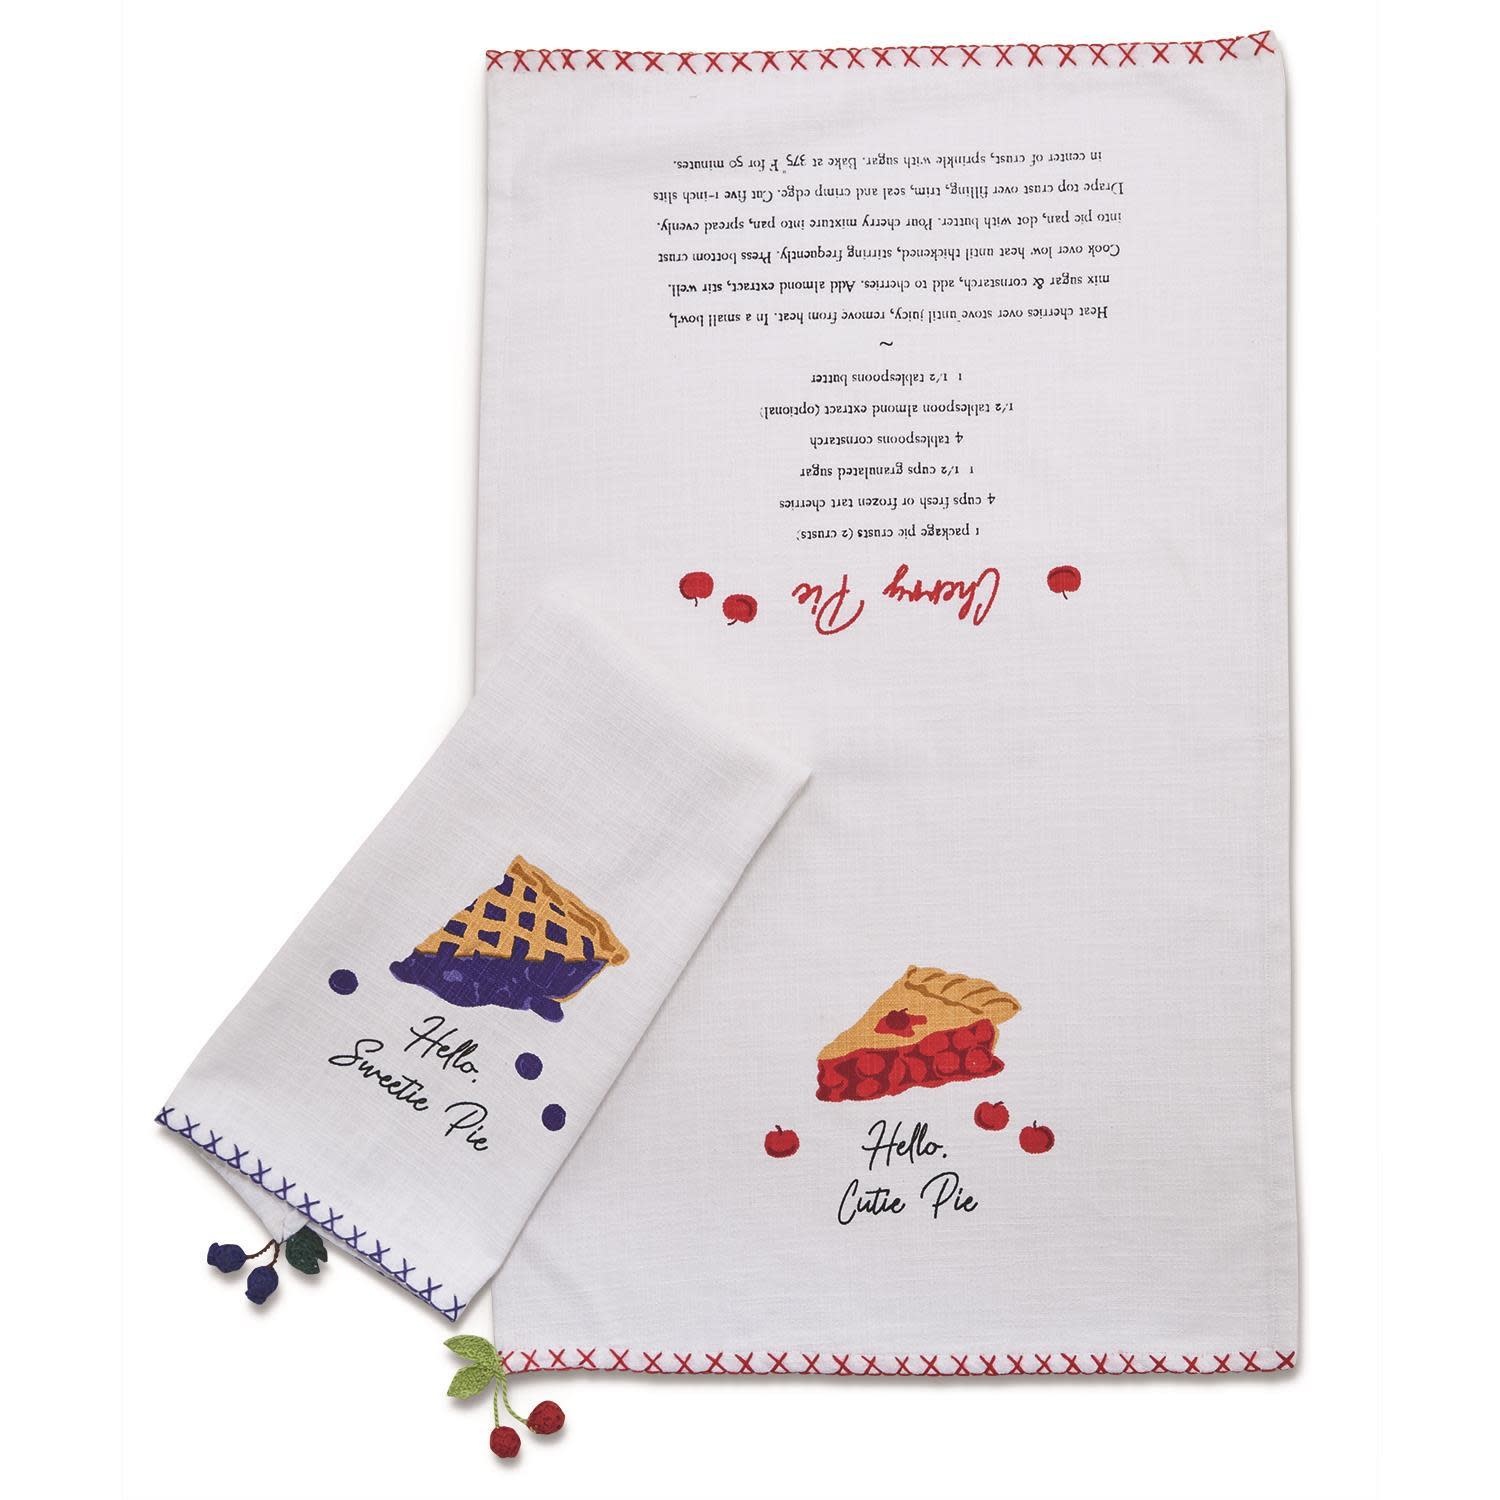 available at m. lynne designs Blueberry Sweetie Pie Tea Towel